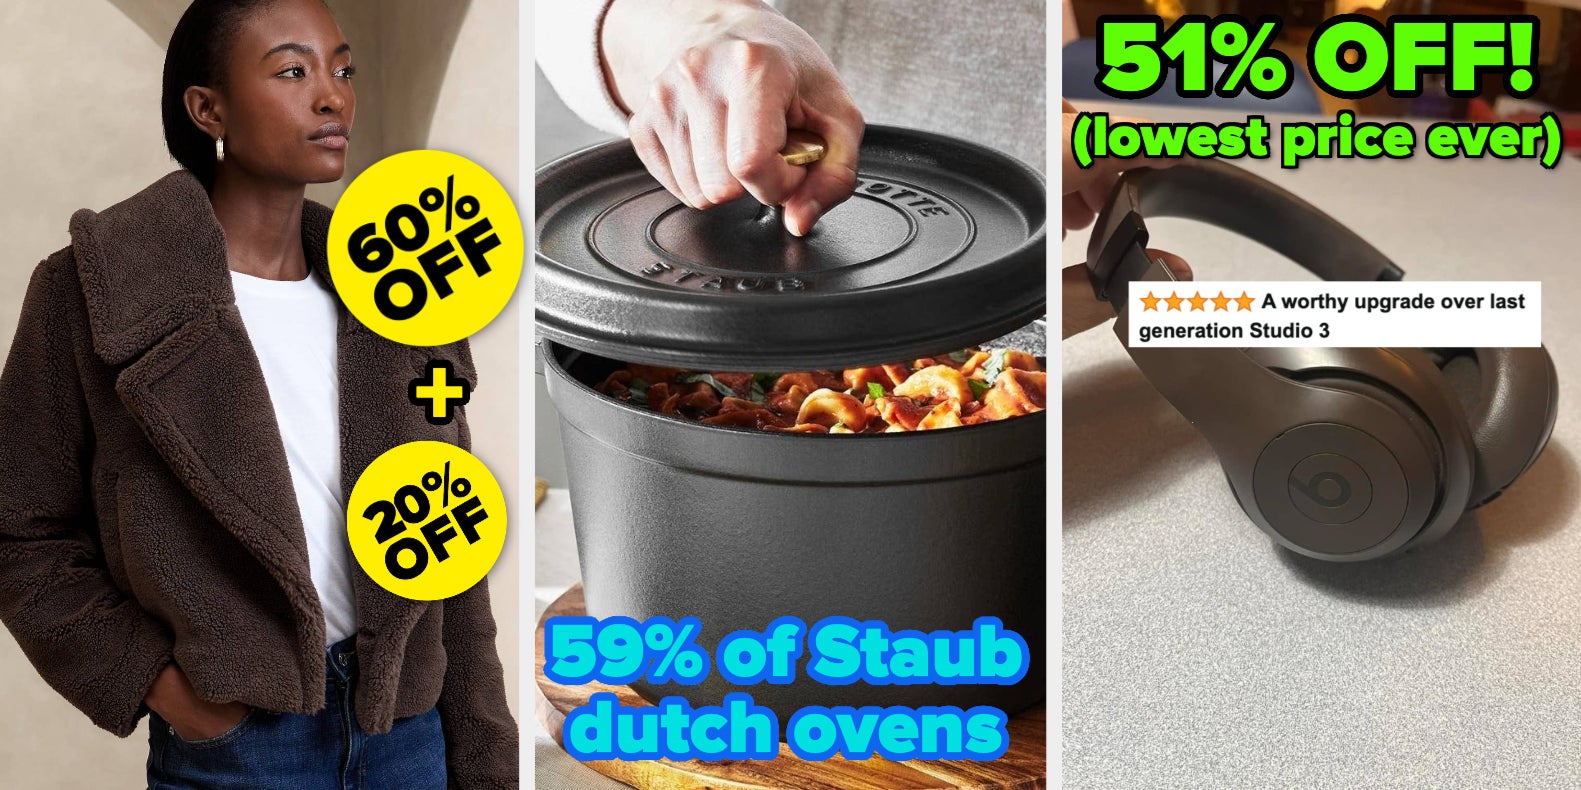 Early doorbuster pricing delivers huge 55% in savings on this 7-qt